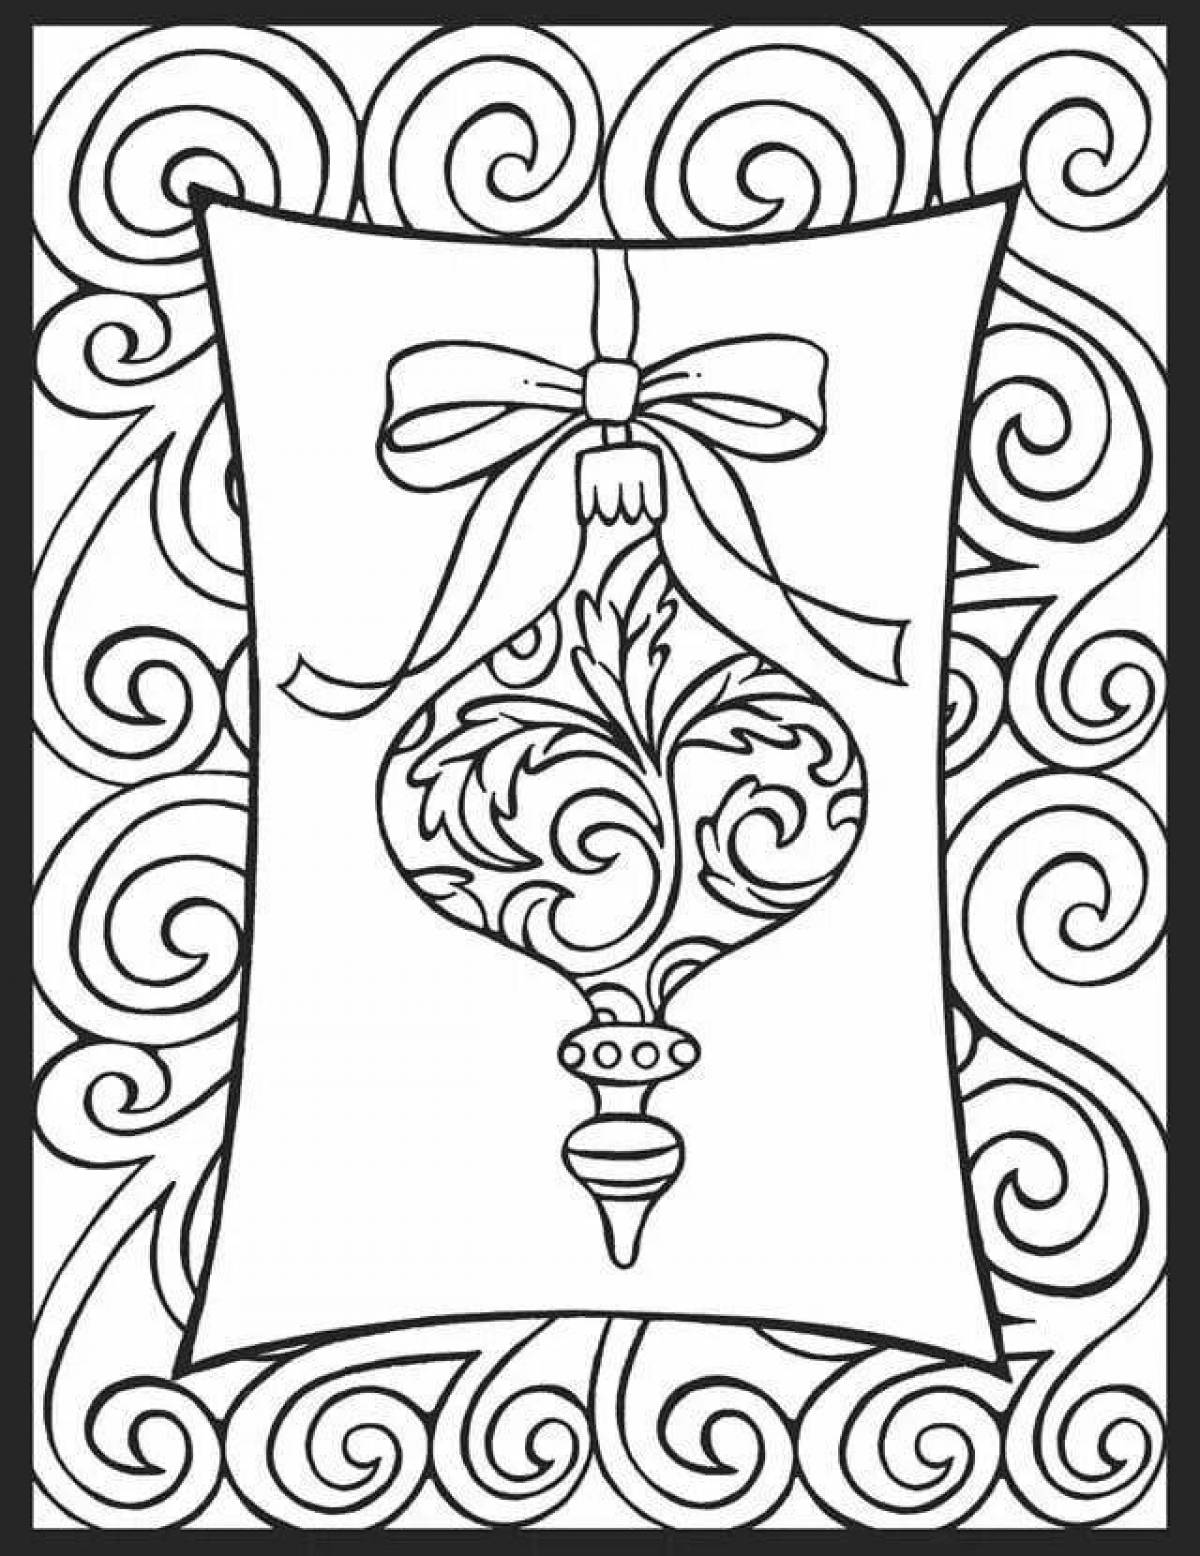 Fine coloring pages with Christmas patterns